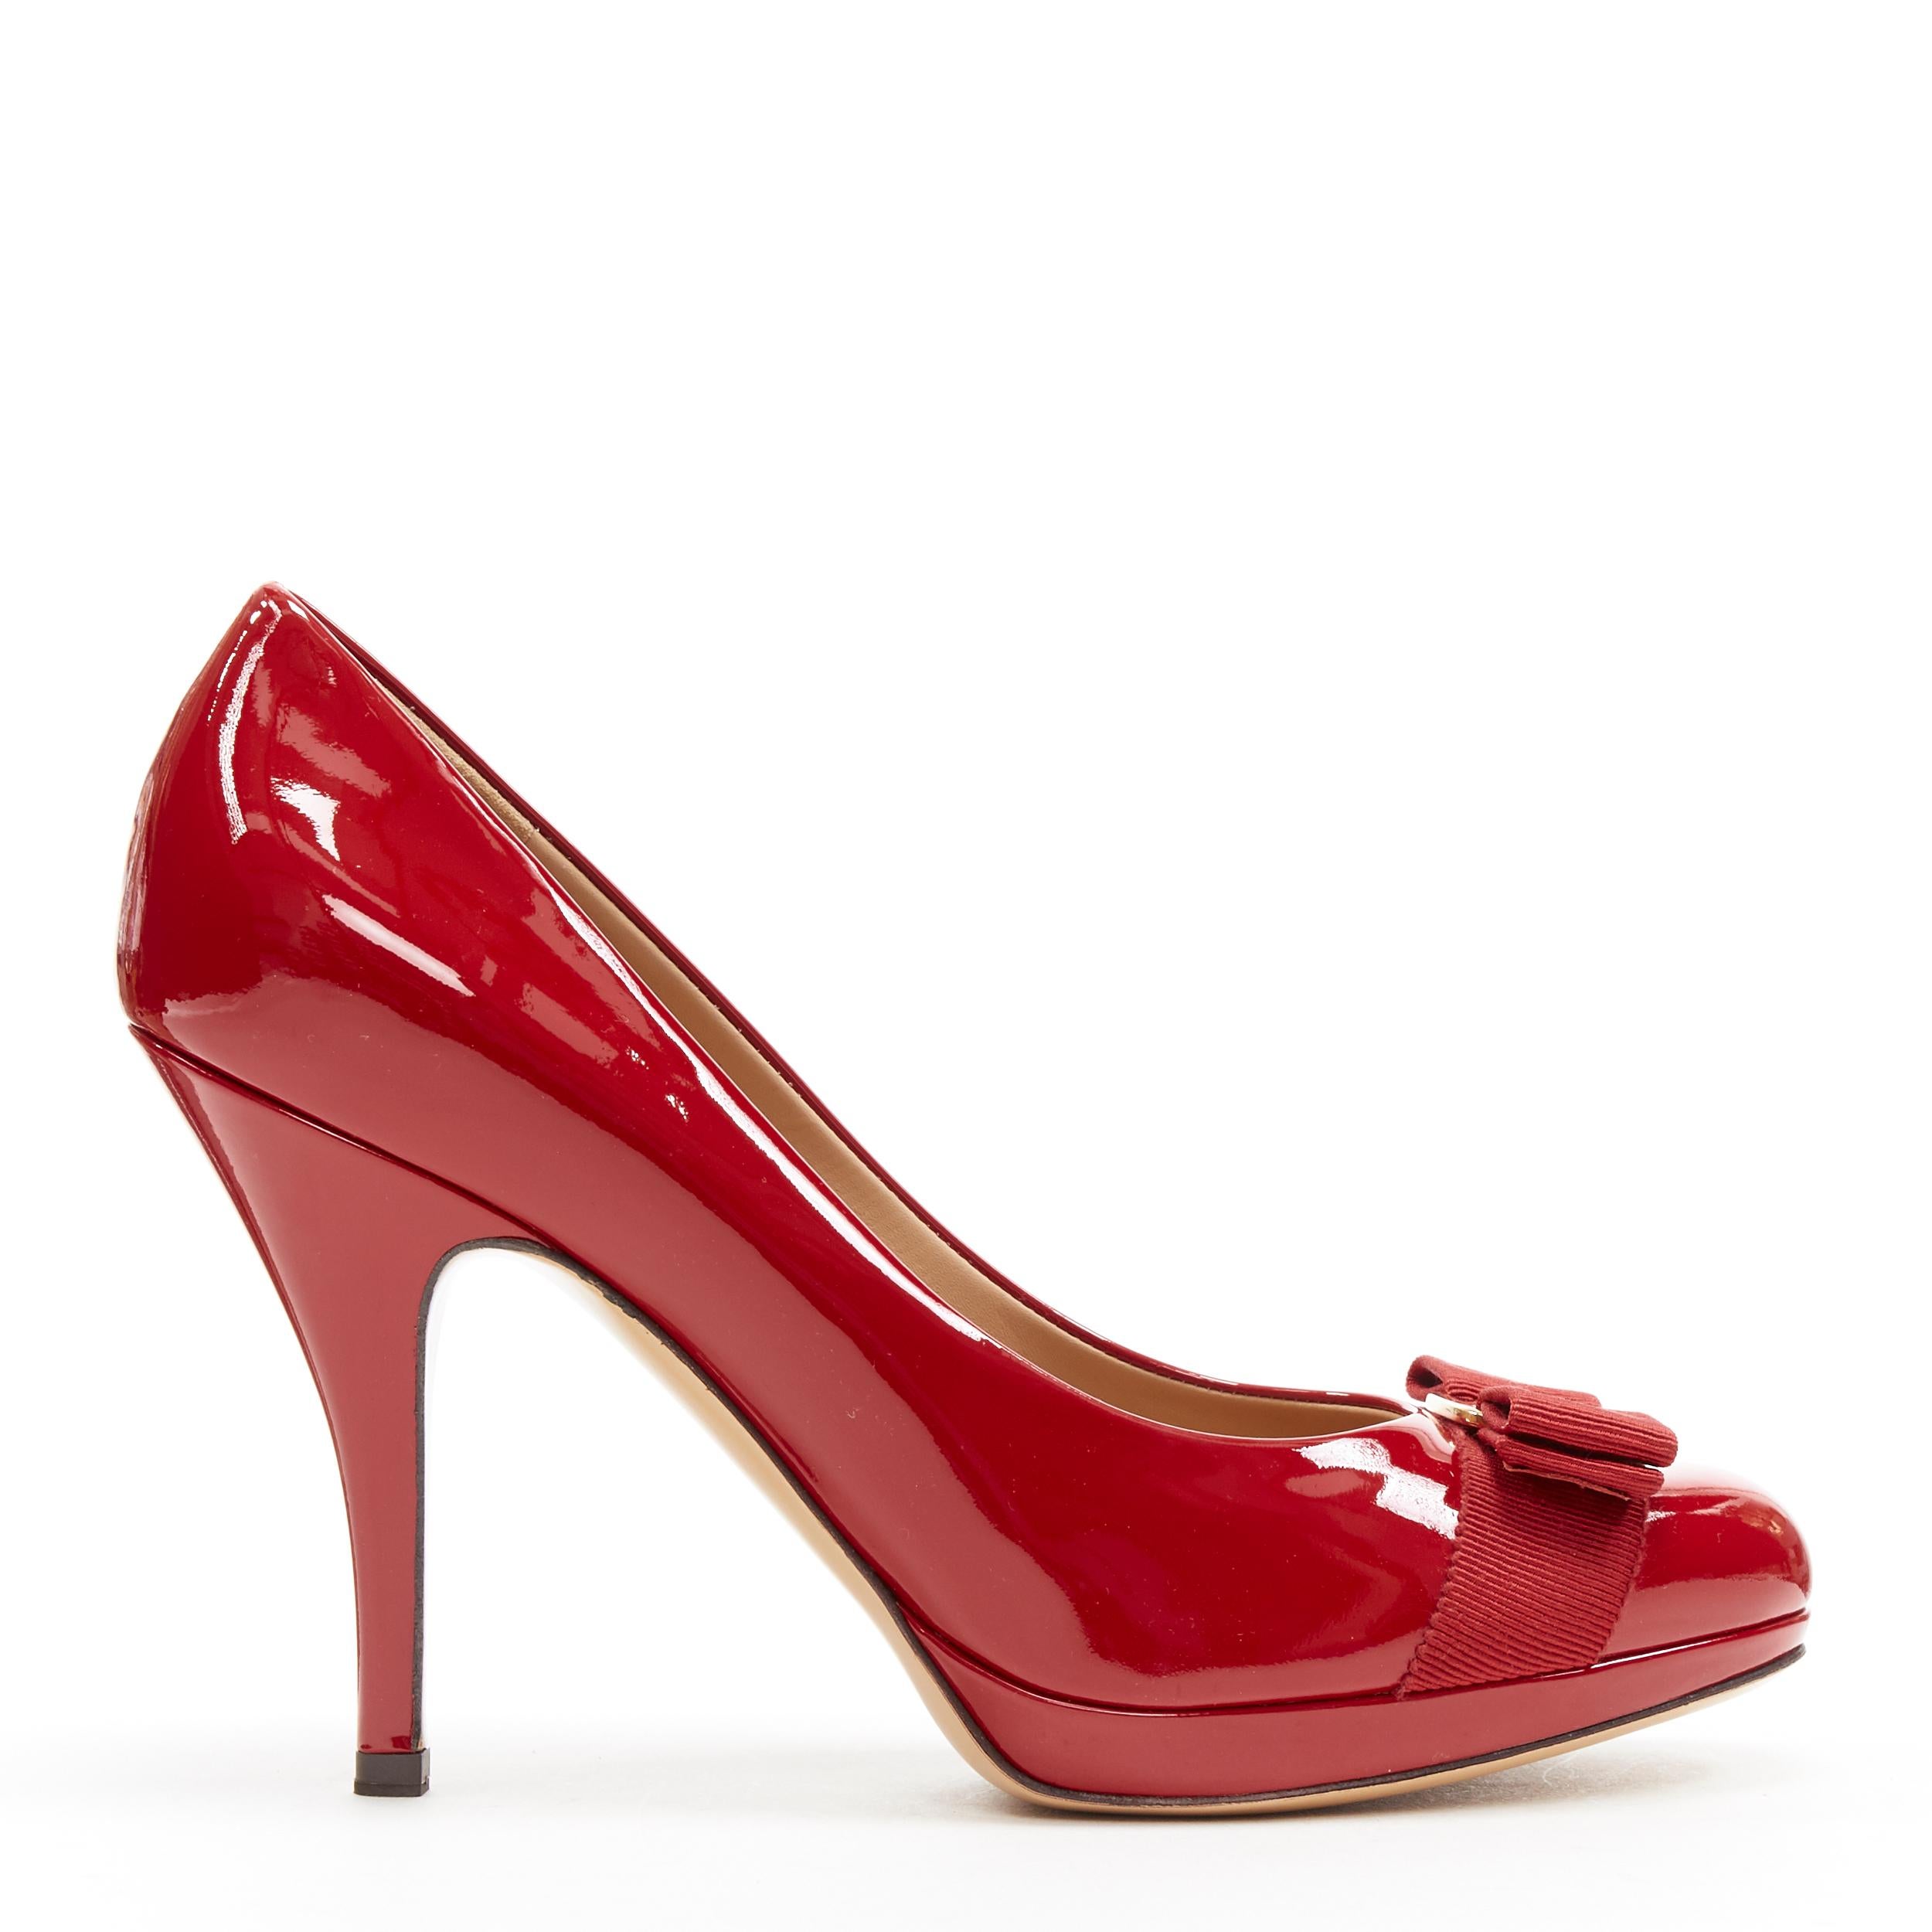 new SALVATORE FERRAGAMO Tina 90 red patent bow platform pump US7.5 EU37.5 Reference: CC/JEYN00376 
Brand: Salvatore Ferragamo 
Model: Tina 90 
Material: Patent leather 
Color: Red 
Pattern: Solid 
Extra Detail: Style name: Tina. Rosso patent calf.